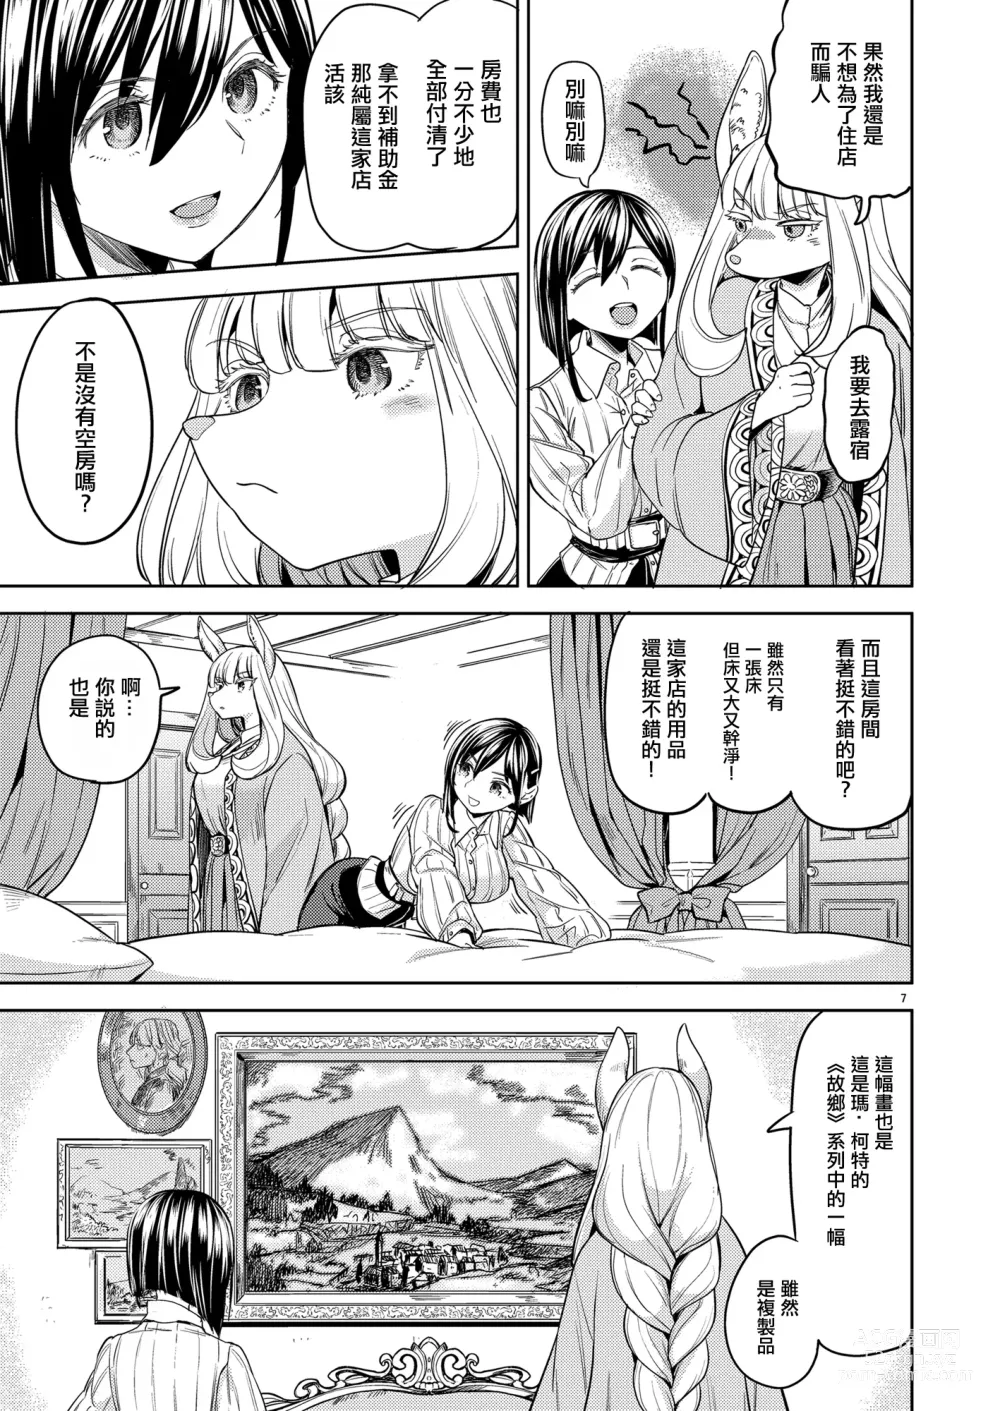 Page 11 of doujinshi 來一場蜜月旅行